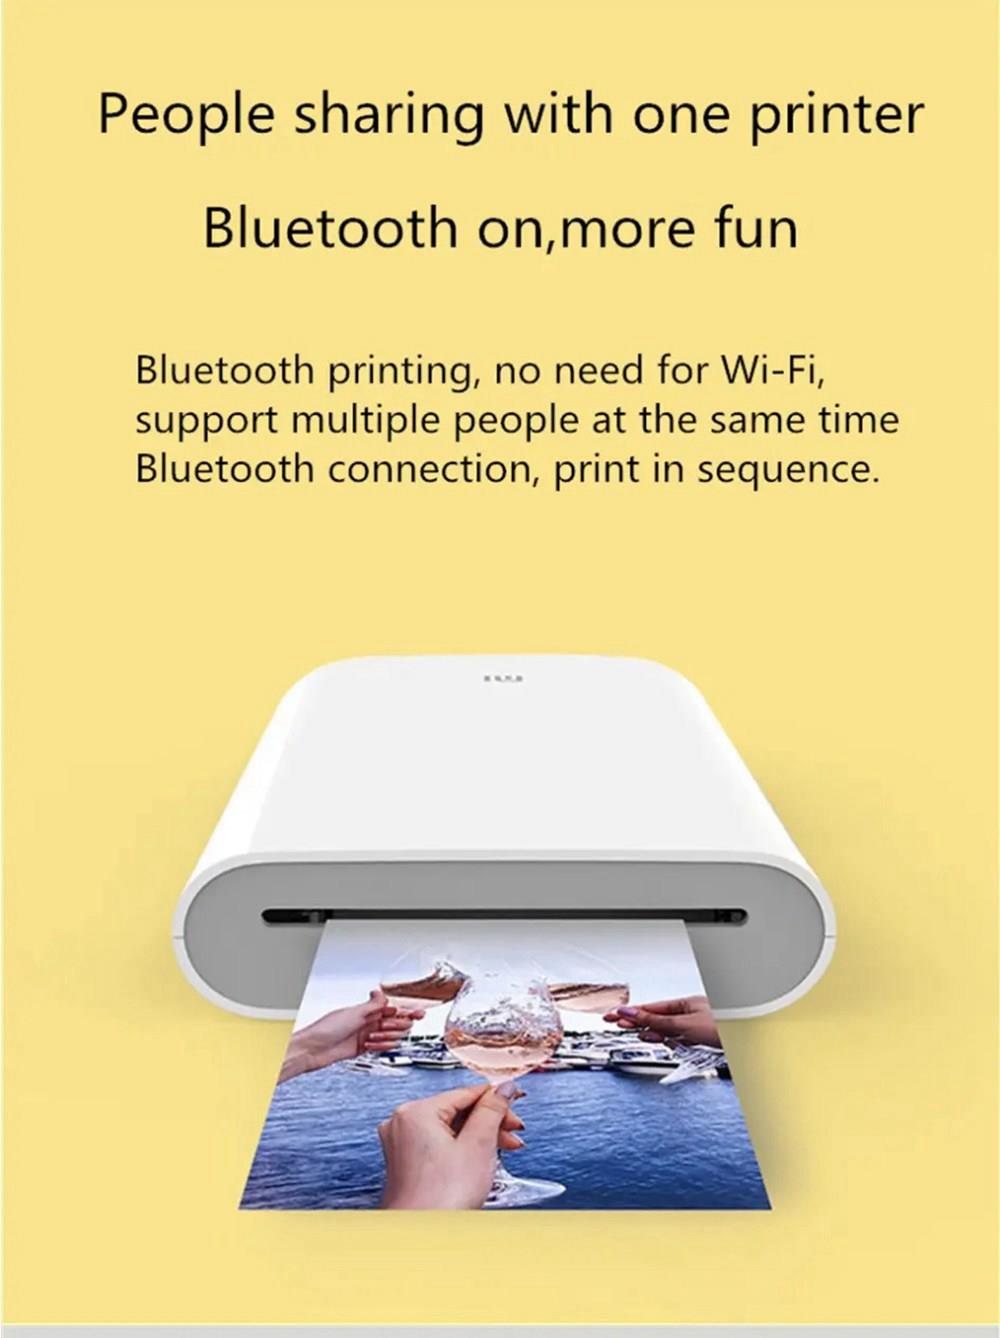 Xiaomi Pocket Photo Printer 3 Inch 300 DPI AR ZINK Non-ink Technology Portable Picture Printer APP Bluetooth Connection - White